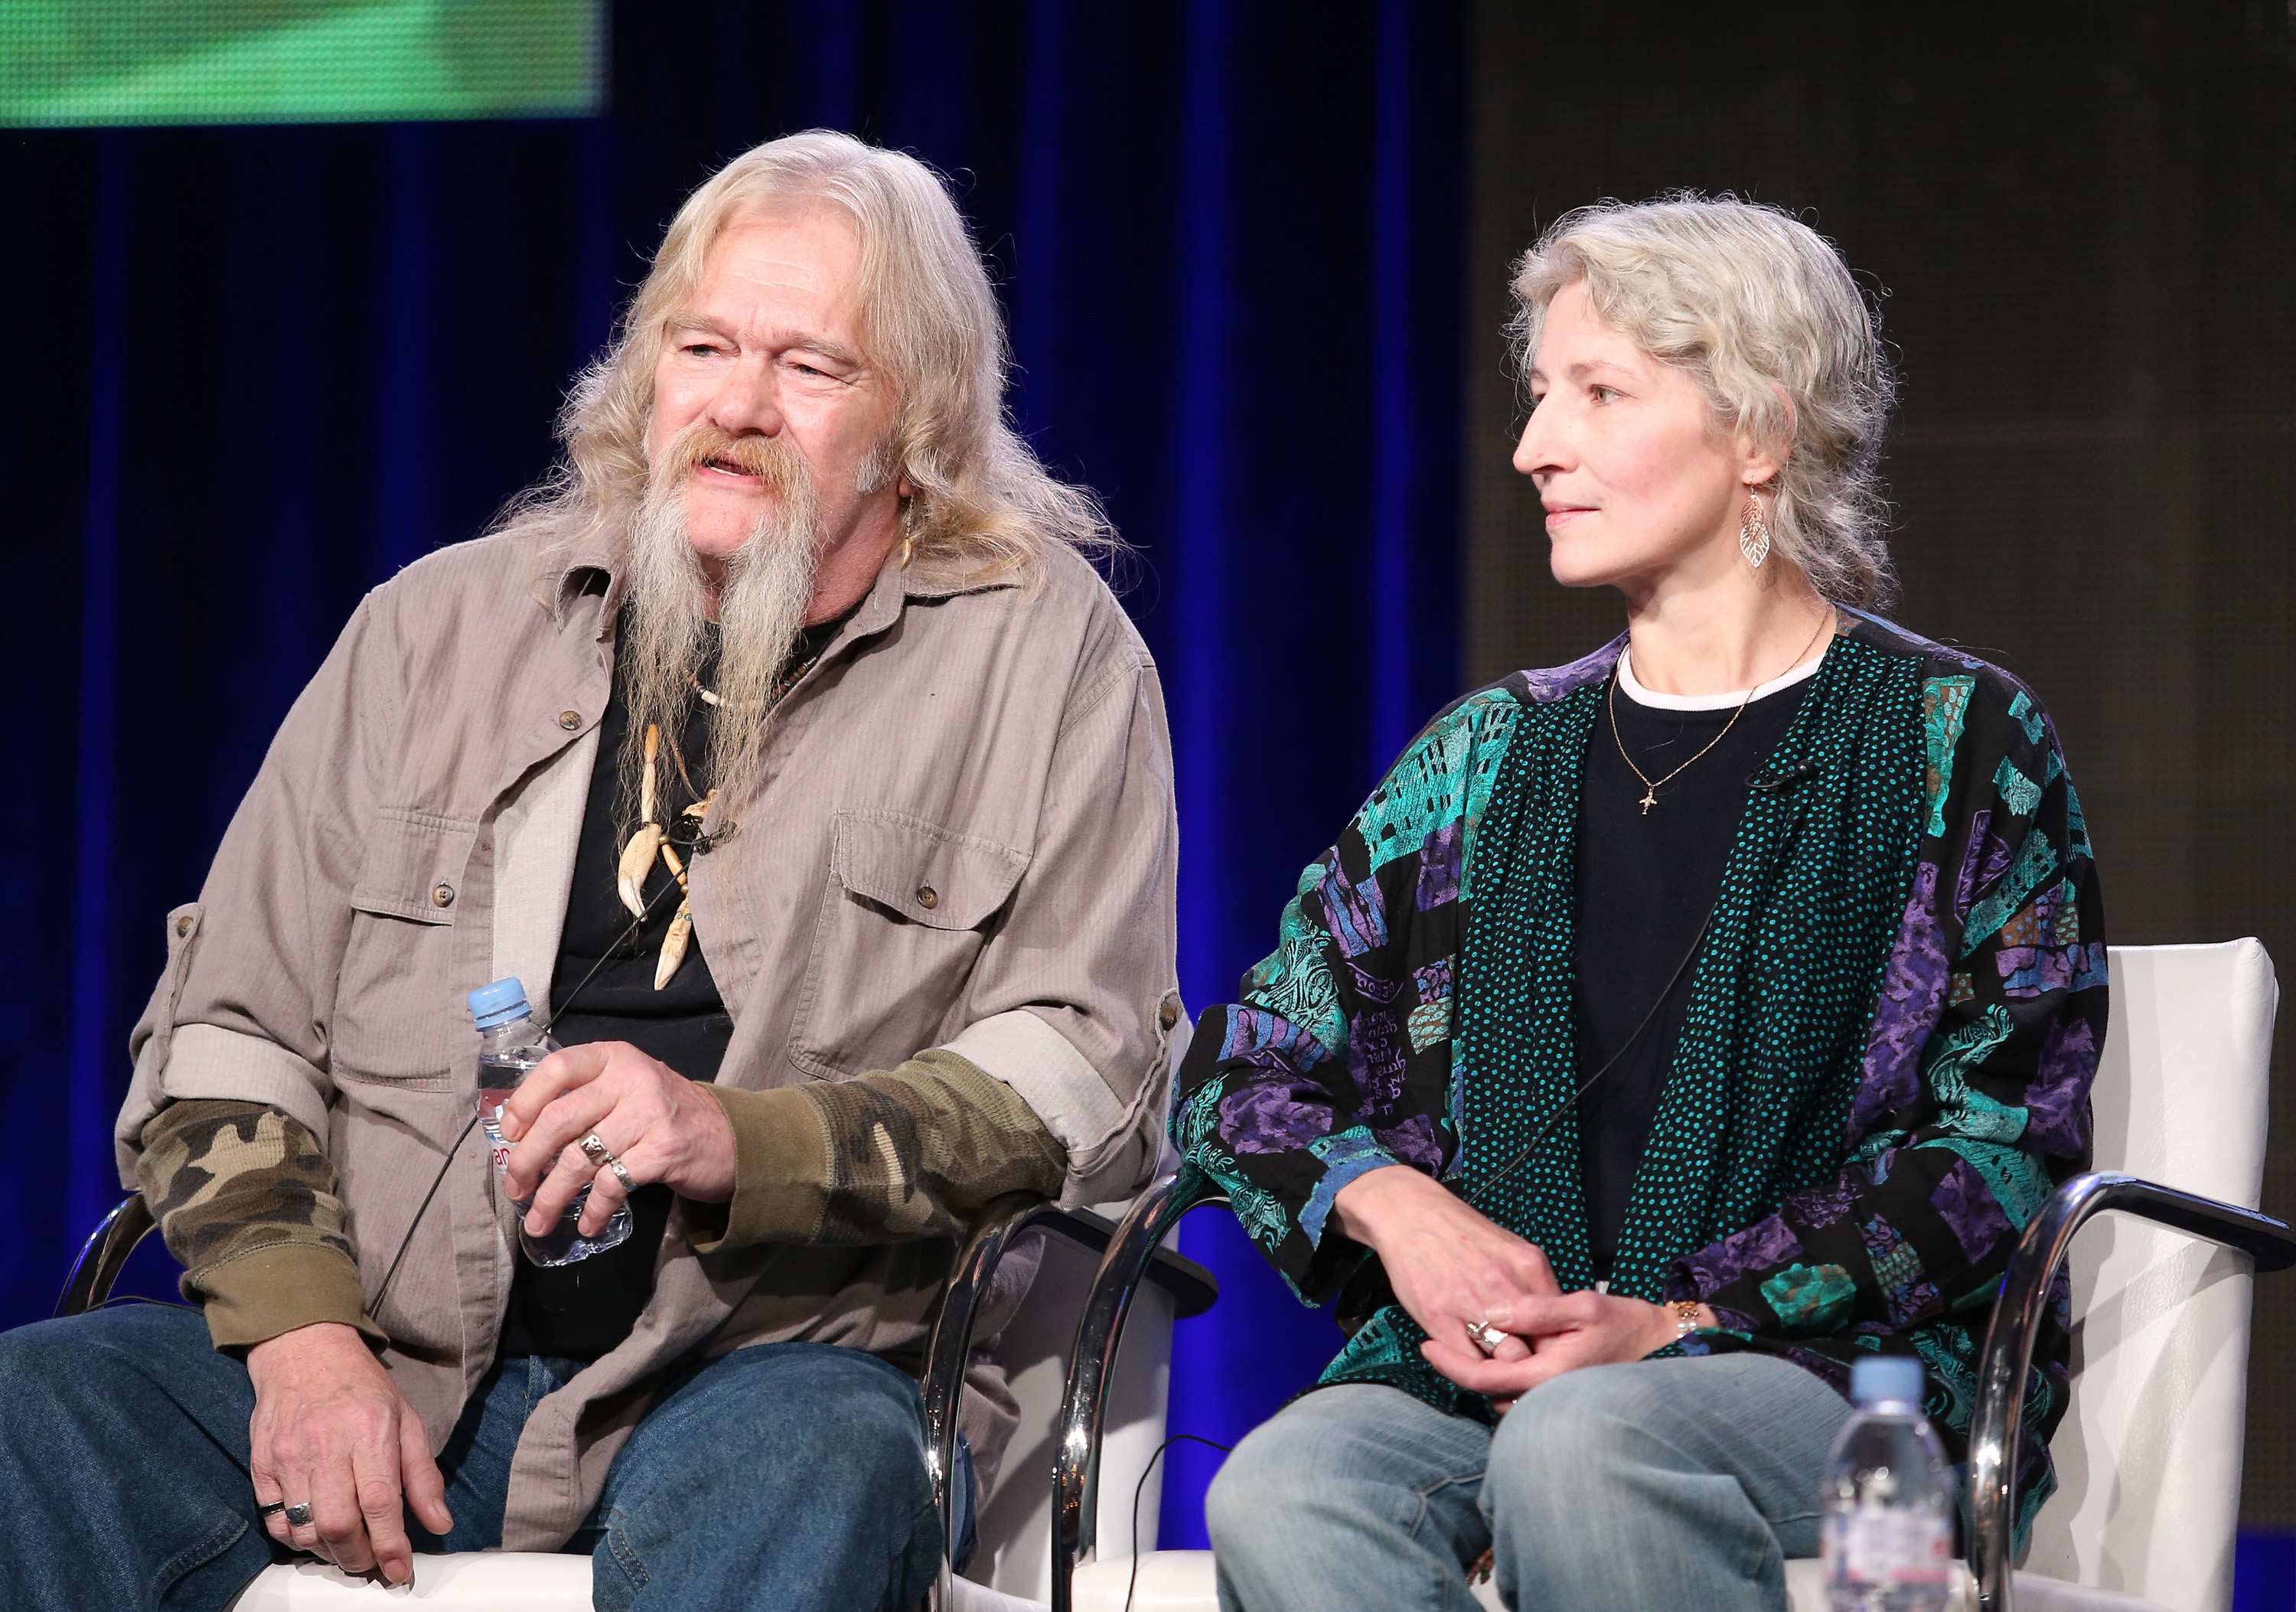 Billy Brown and Ami Brown from 'Alaskan Bush People' on stage at the 2014 TCA press tour